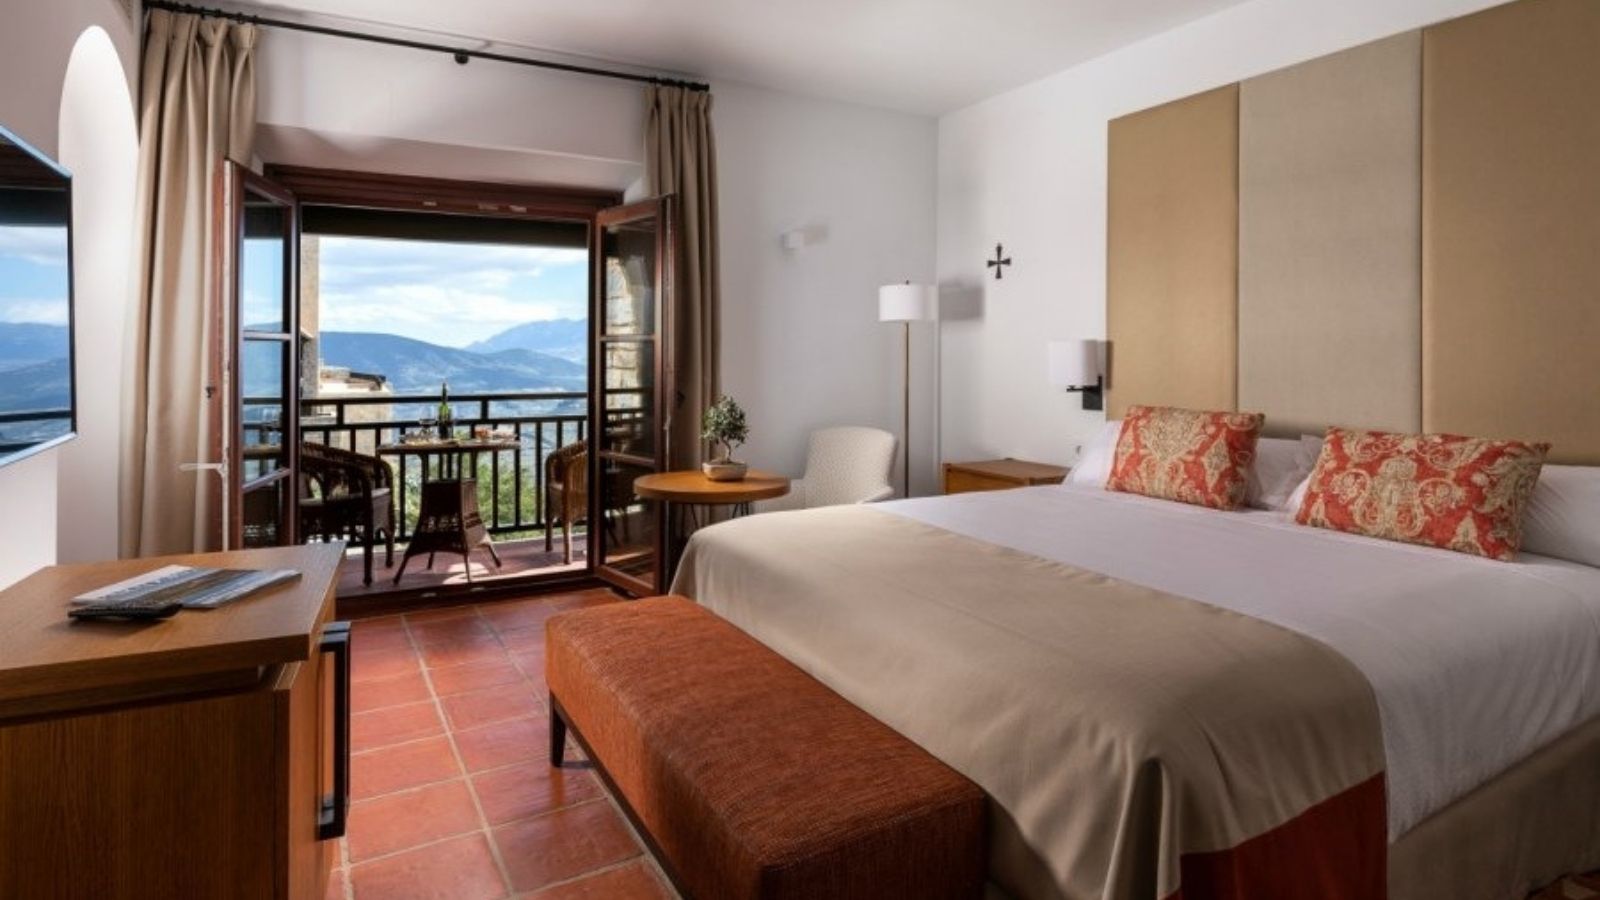 a bedroom with a view of mountains and a balcony